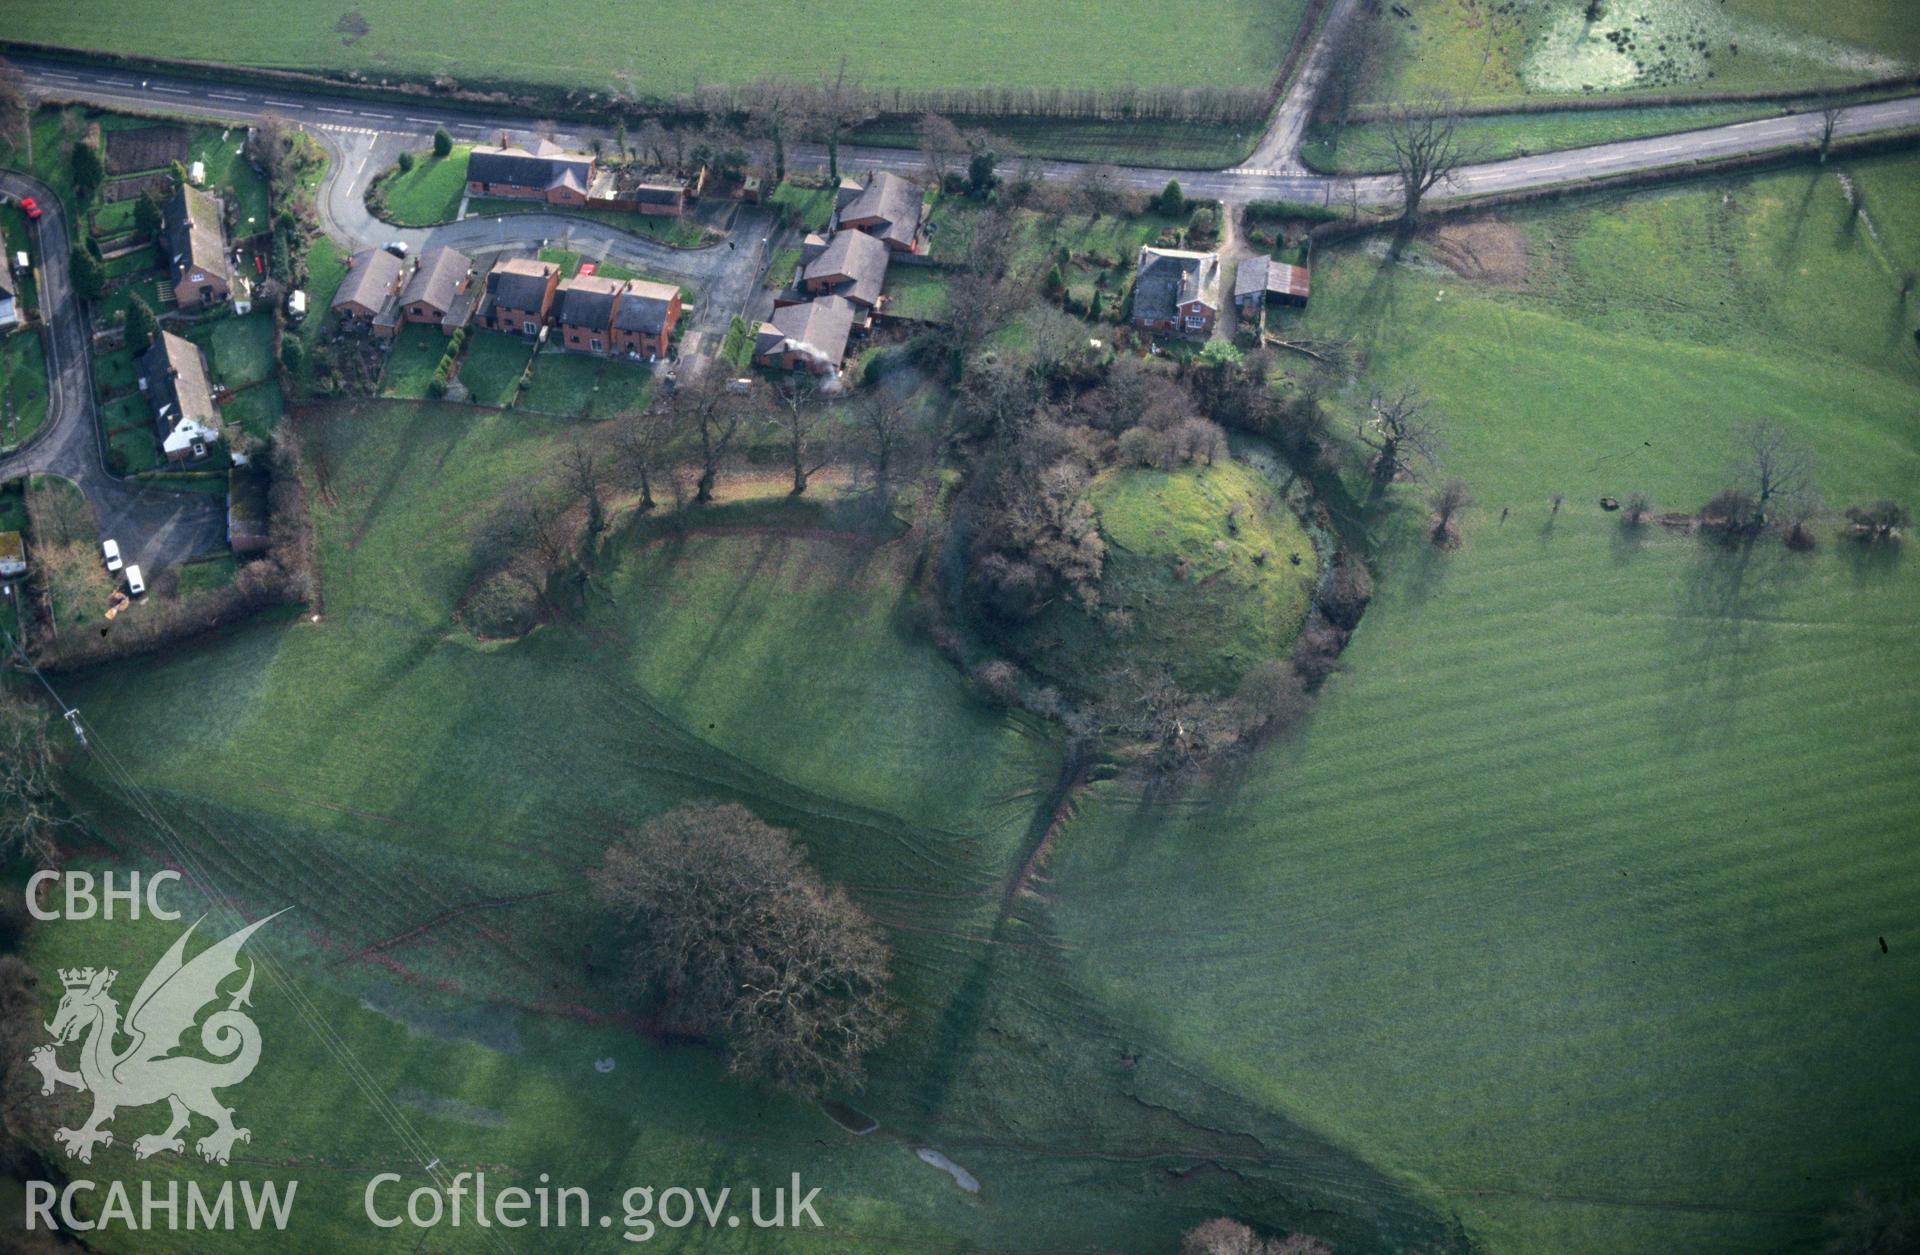 RCAHMW colour oblique aerial photograph of Domen Gastell, Llanfechain taken on 30/01/1995 by C.R. Musson